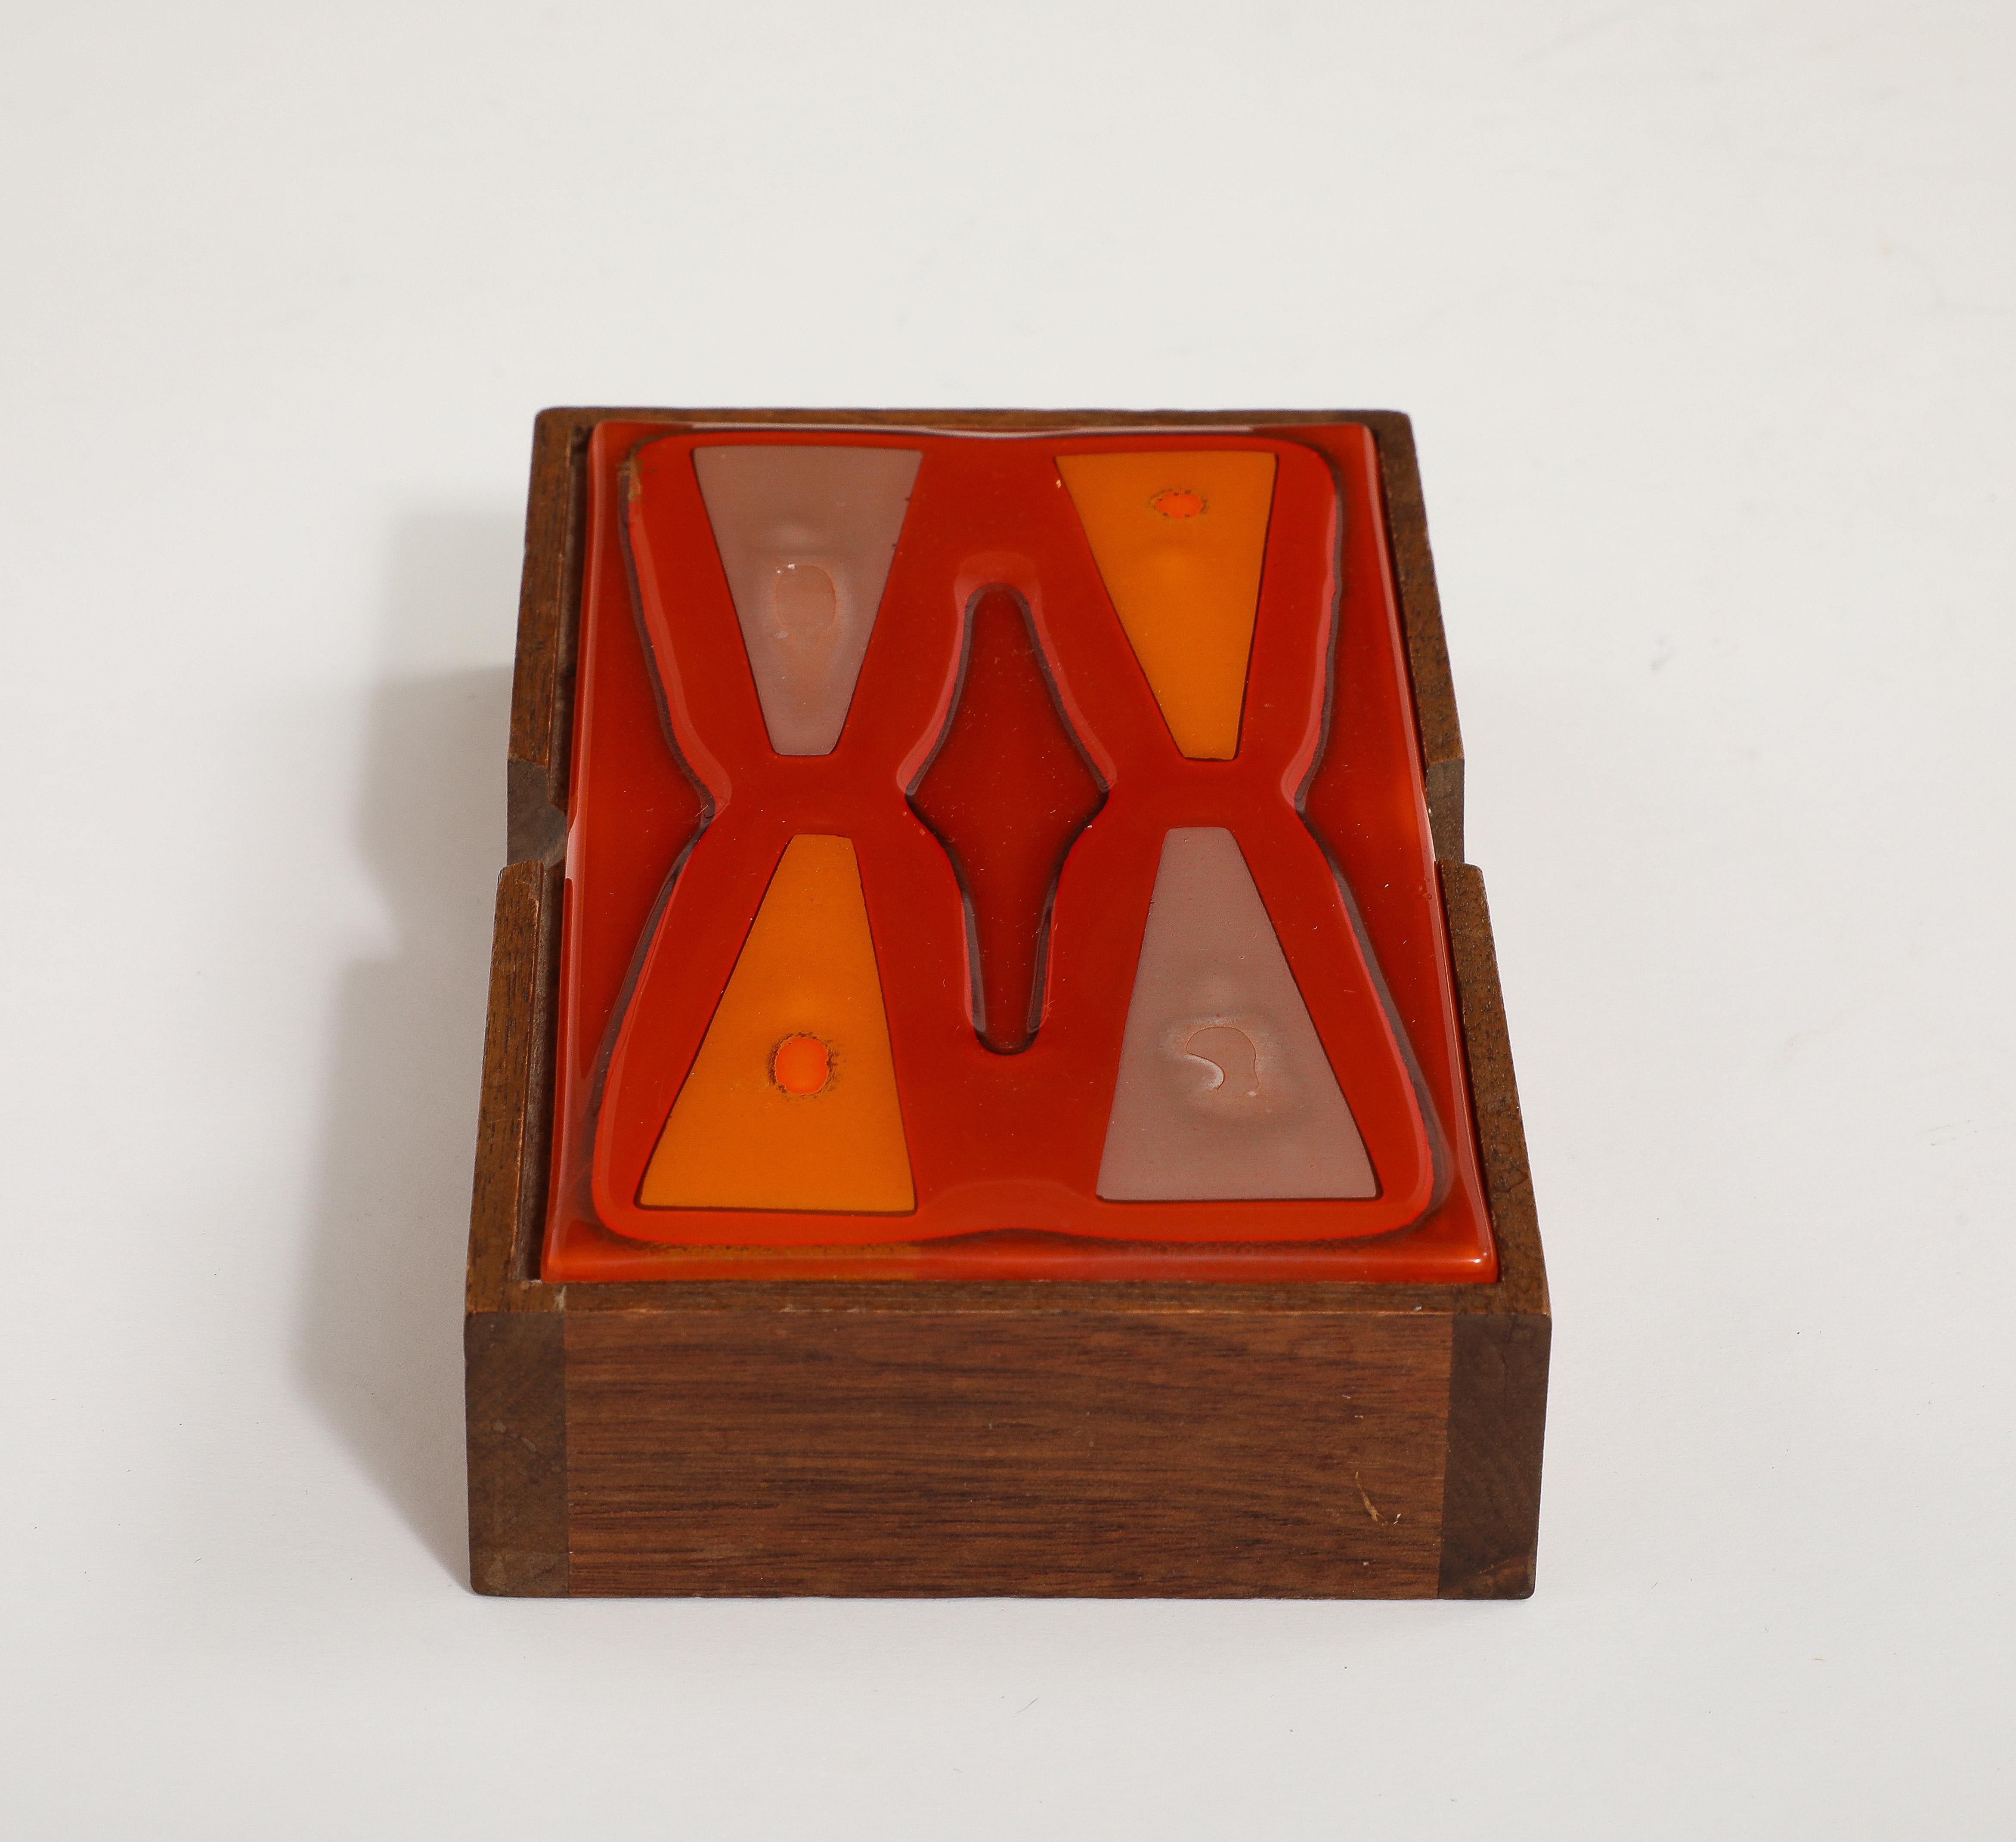 Decorative keepsake/cigarette wood box topped with a red orange Higgins Glass graphic lid. Great as a desk or bedside accessory. Signed